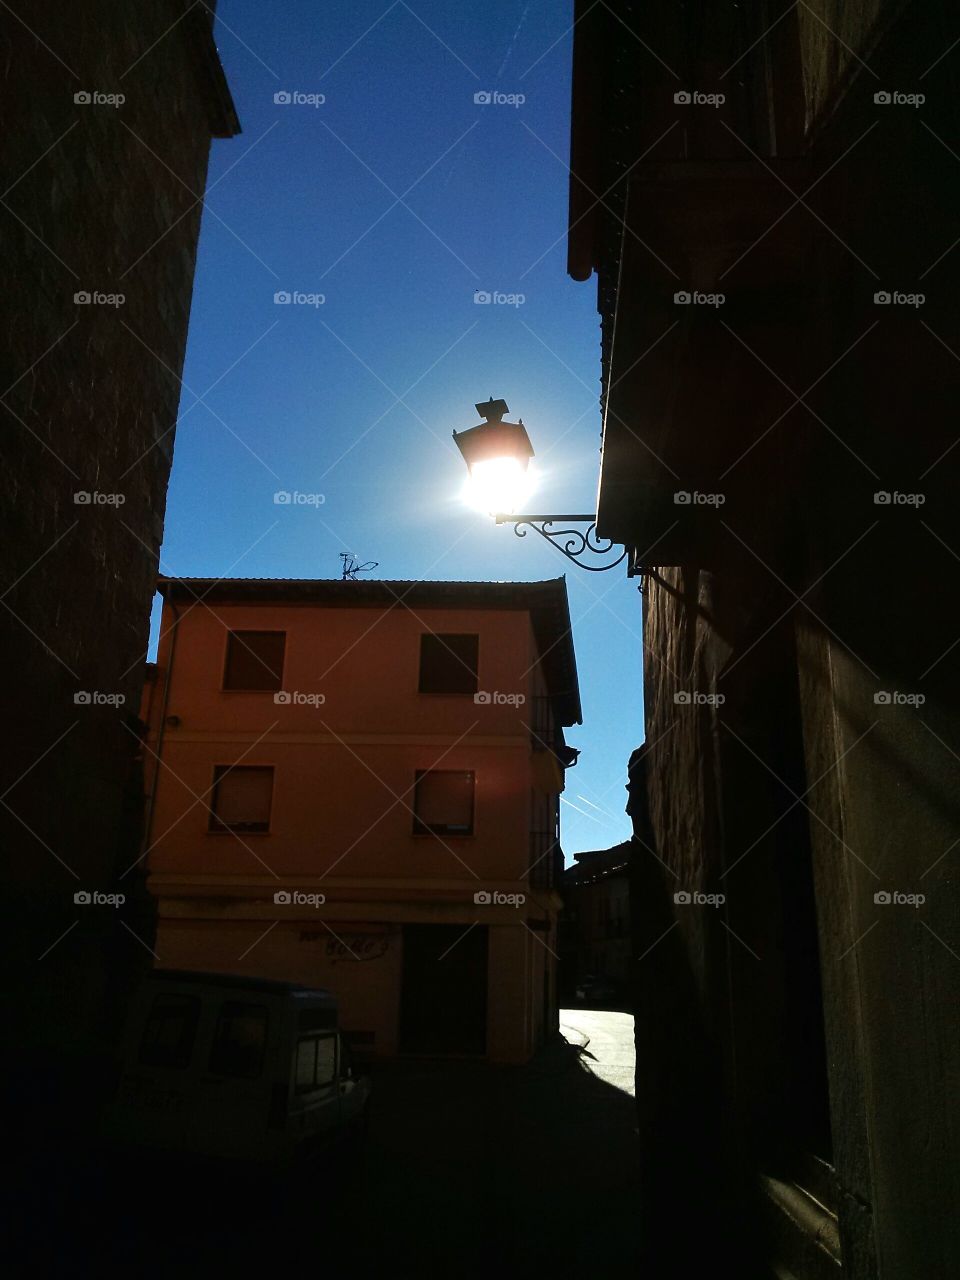 Bright sunlight behind a street lamp in a village.